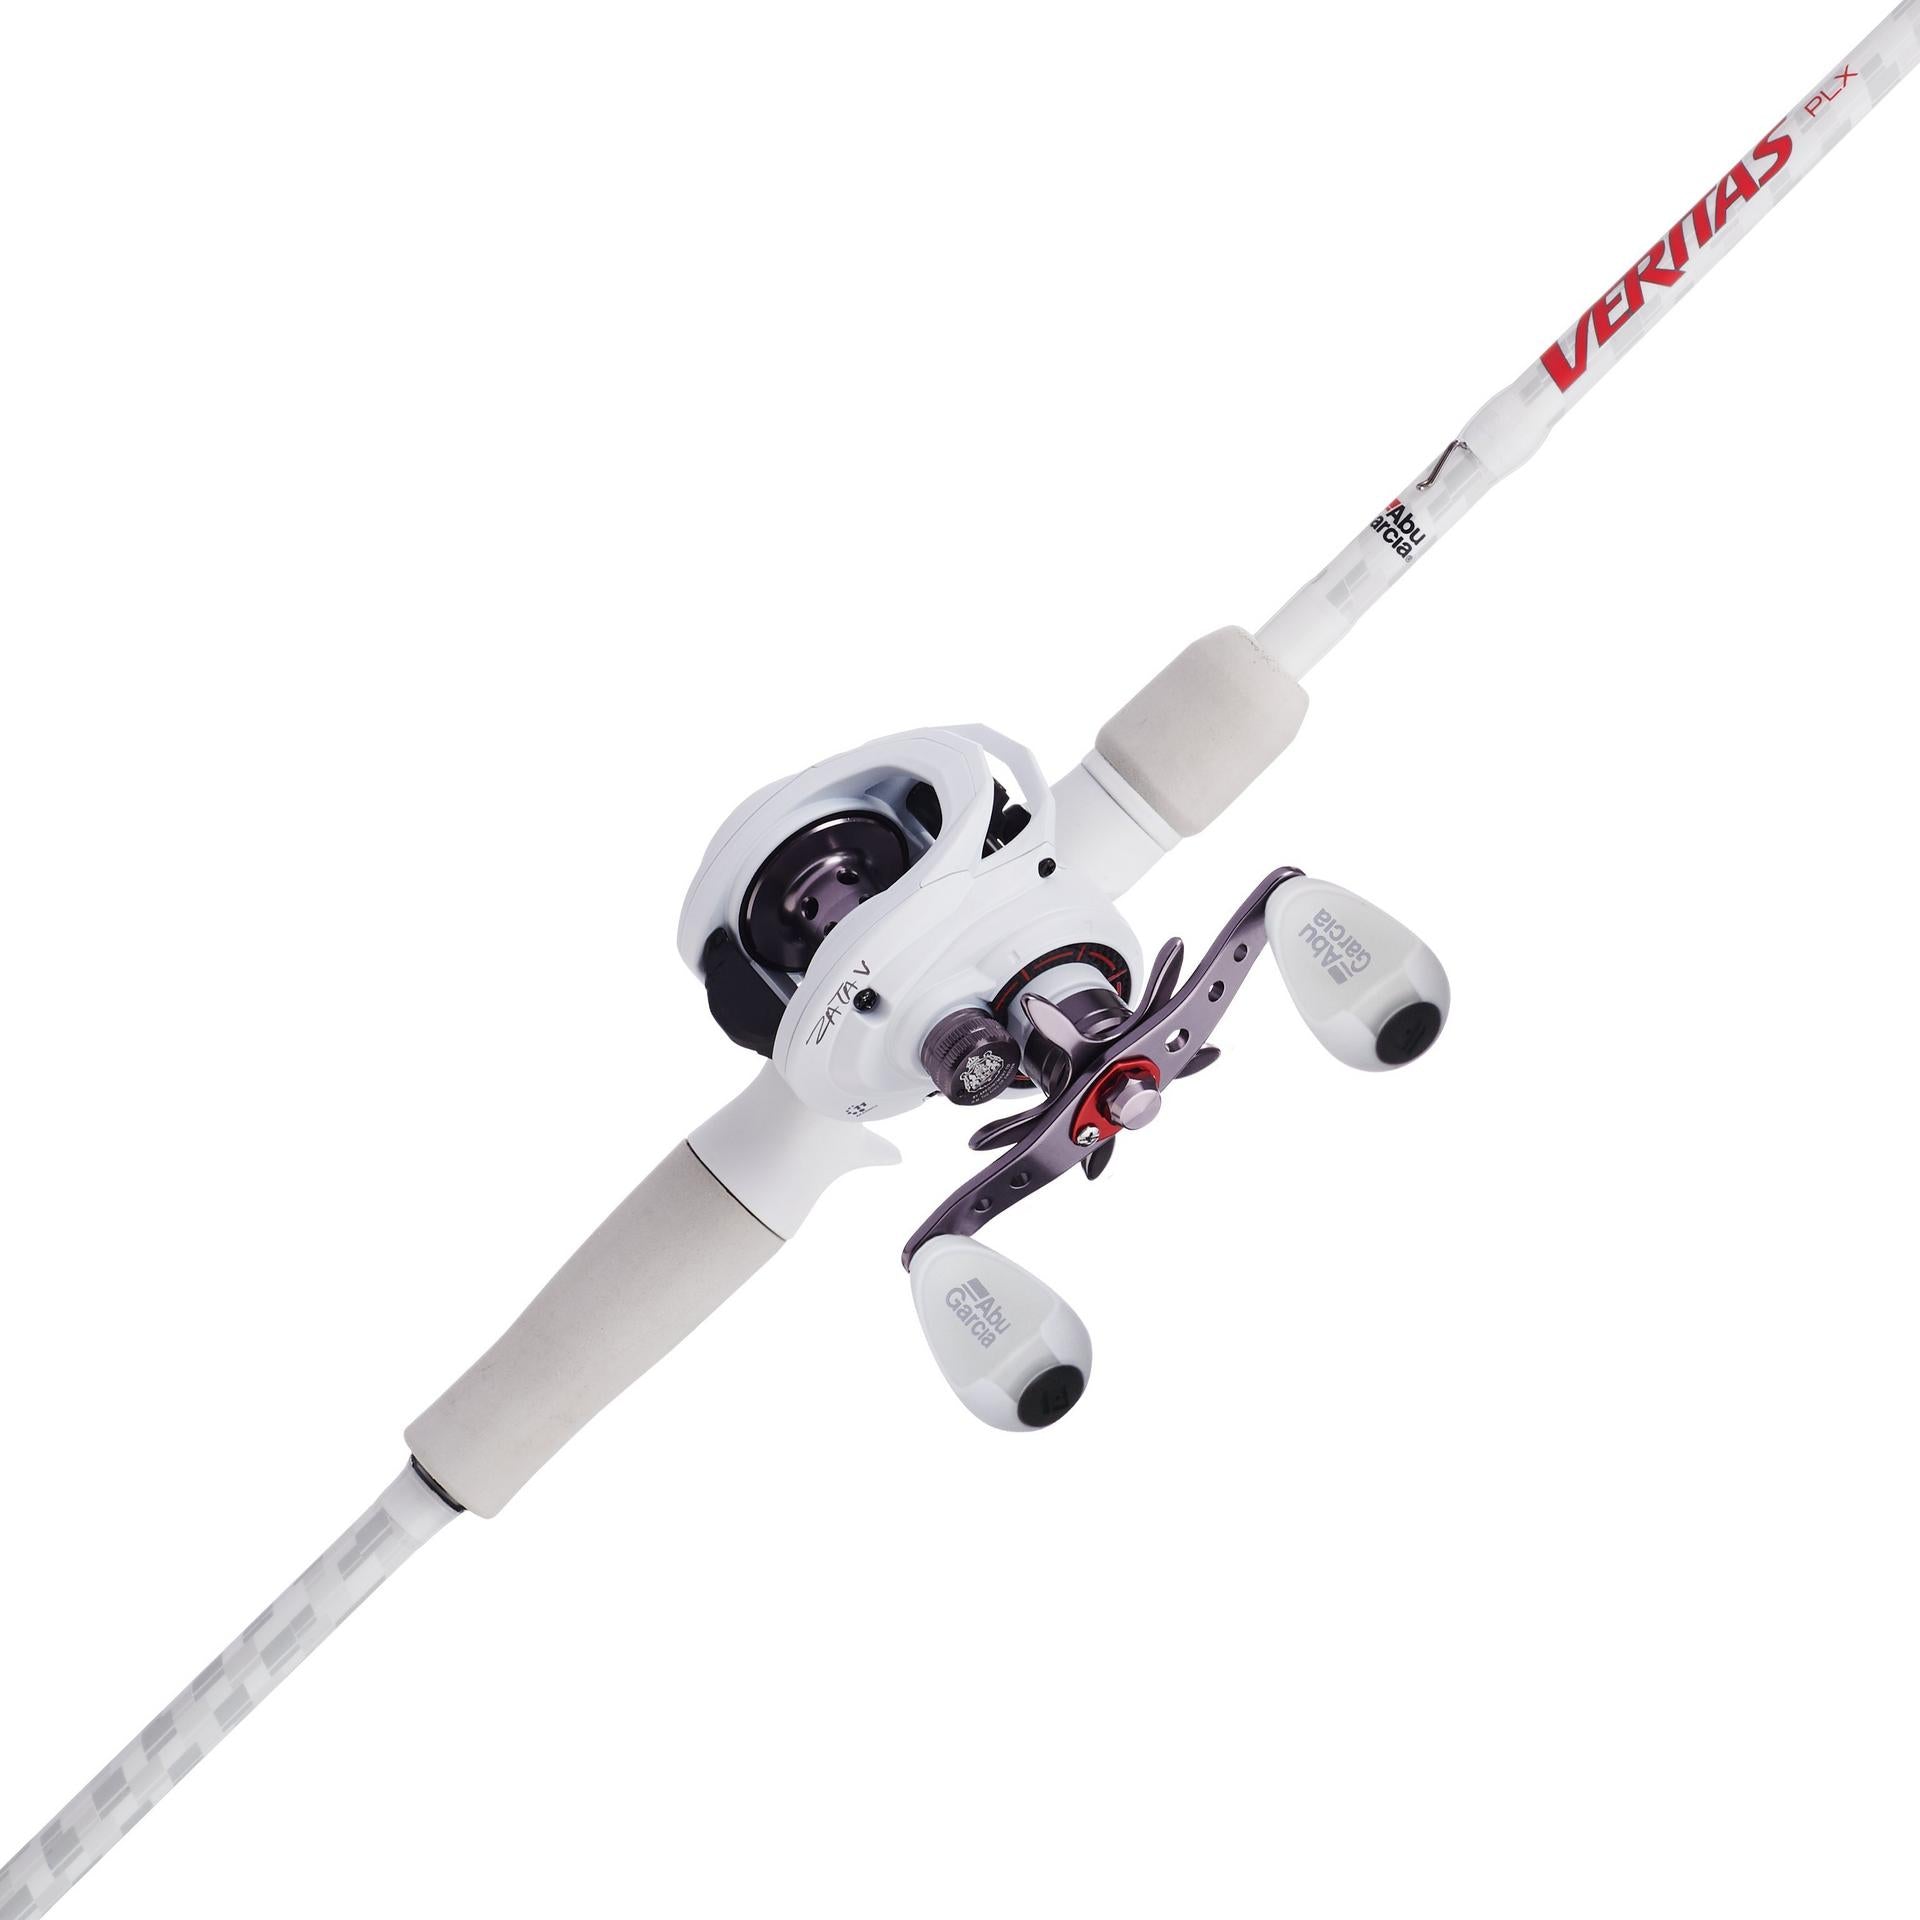 Baitcast combos (2), casting rod (1), spinning rods (5)